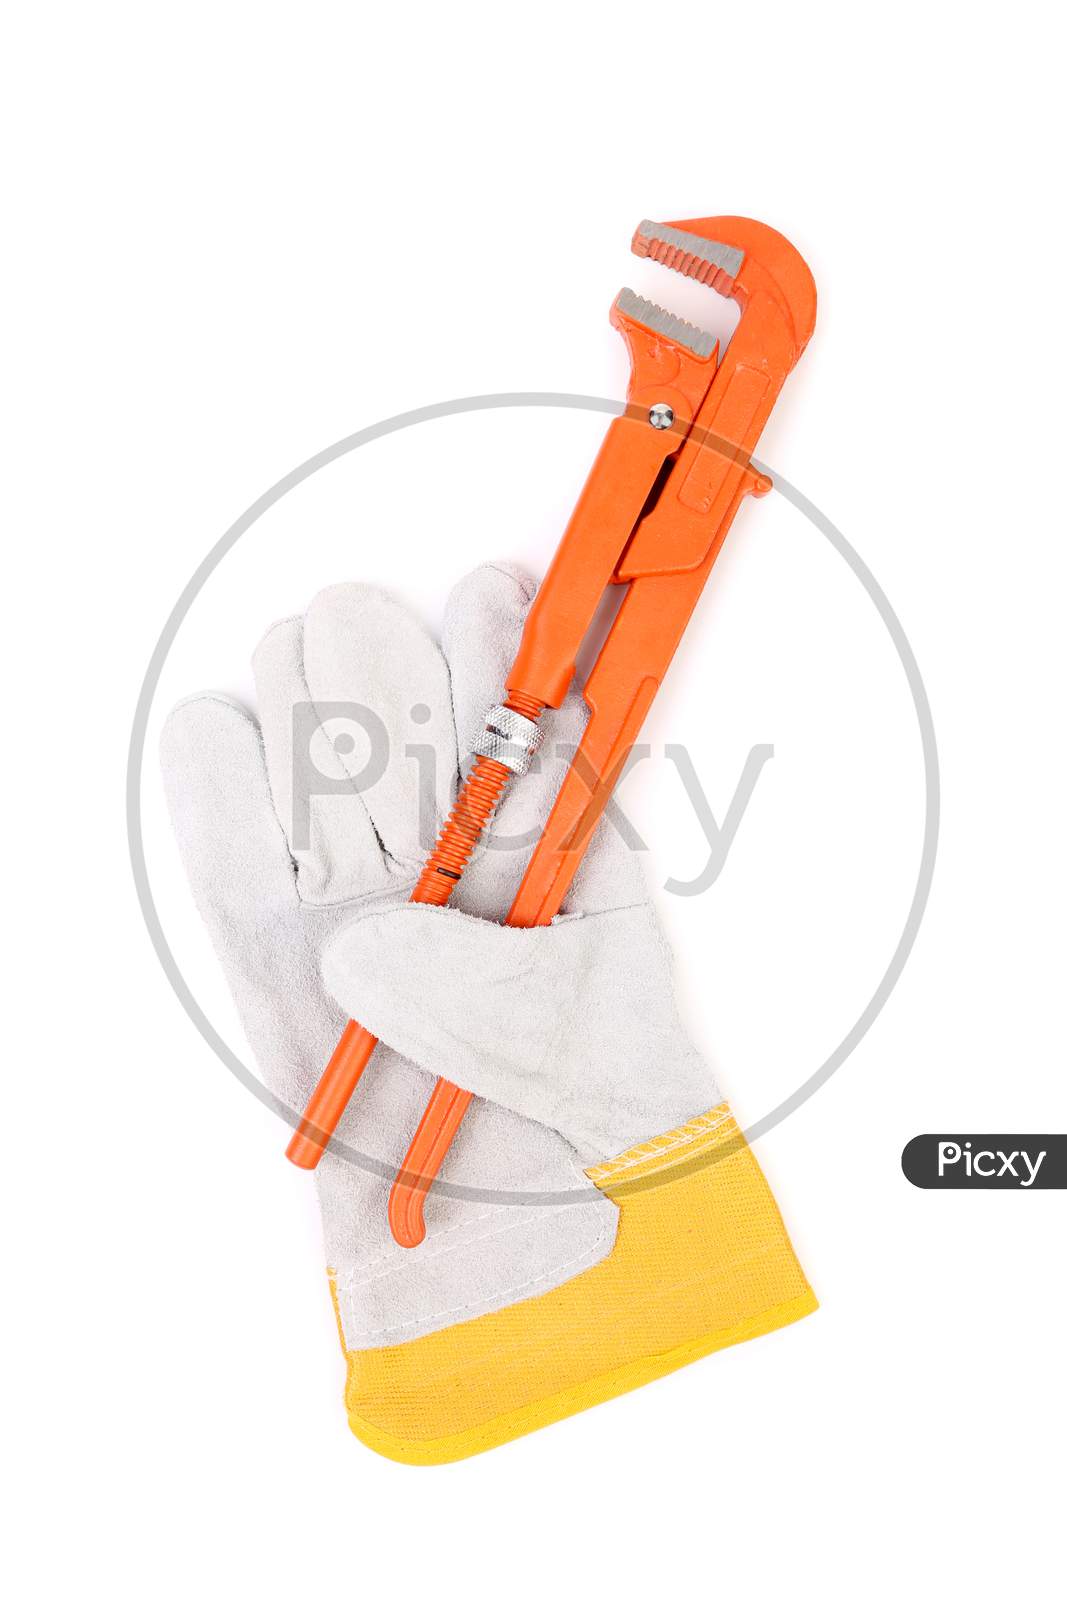 Construction Gloves And Gas Wrench. Isolated On A White Background.